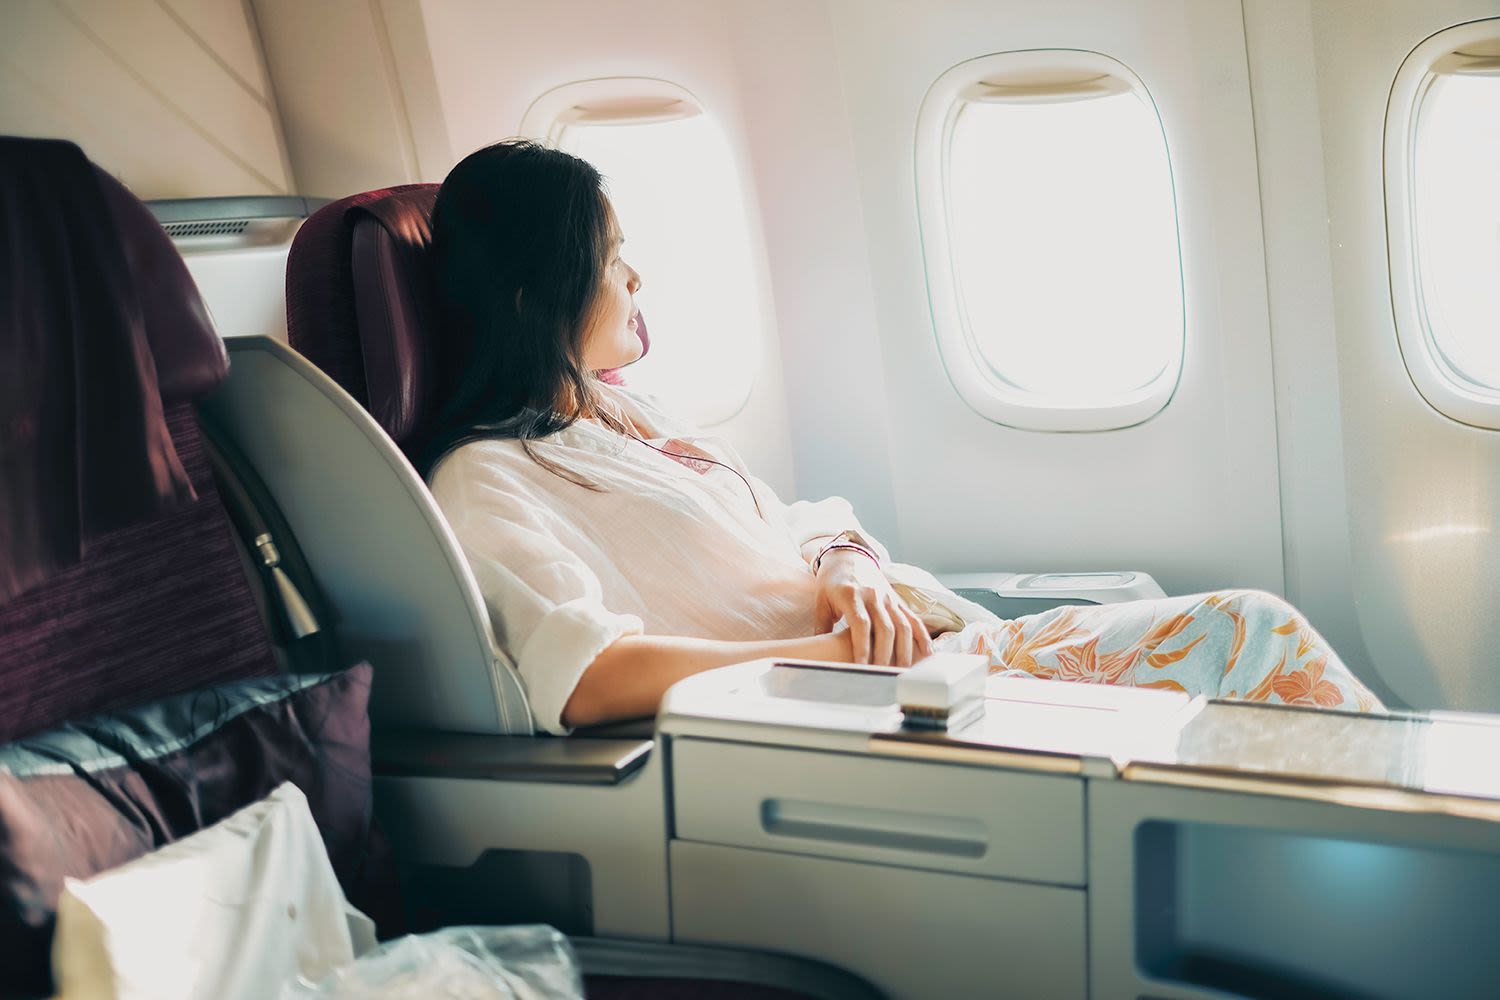 Woman Takes Business Class Upgrade, Leaves Ex and His Son in Coach After Breaking Up on Trip